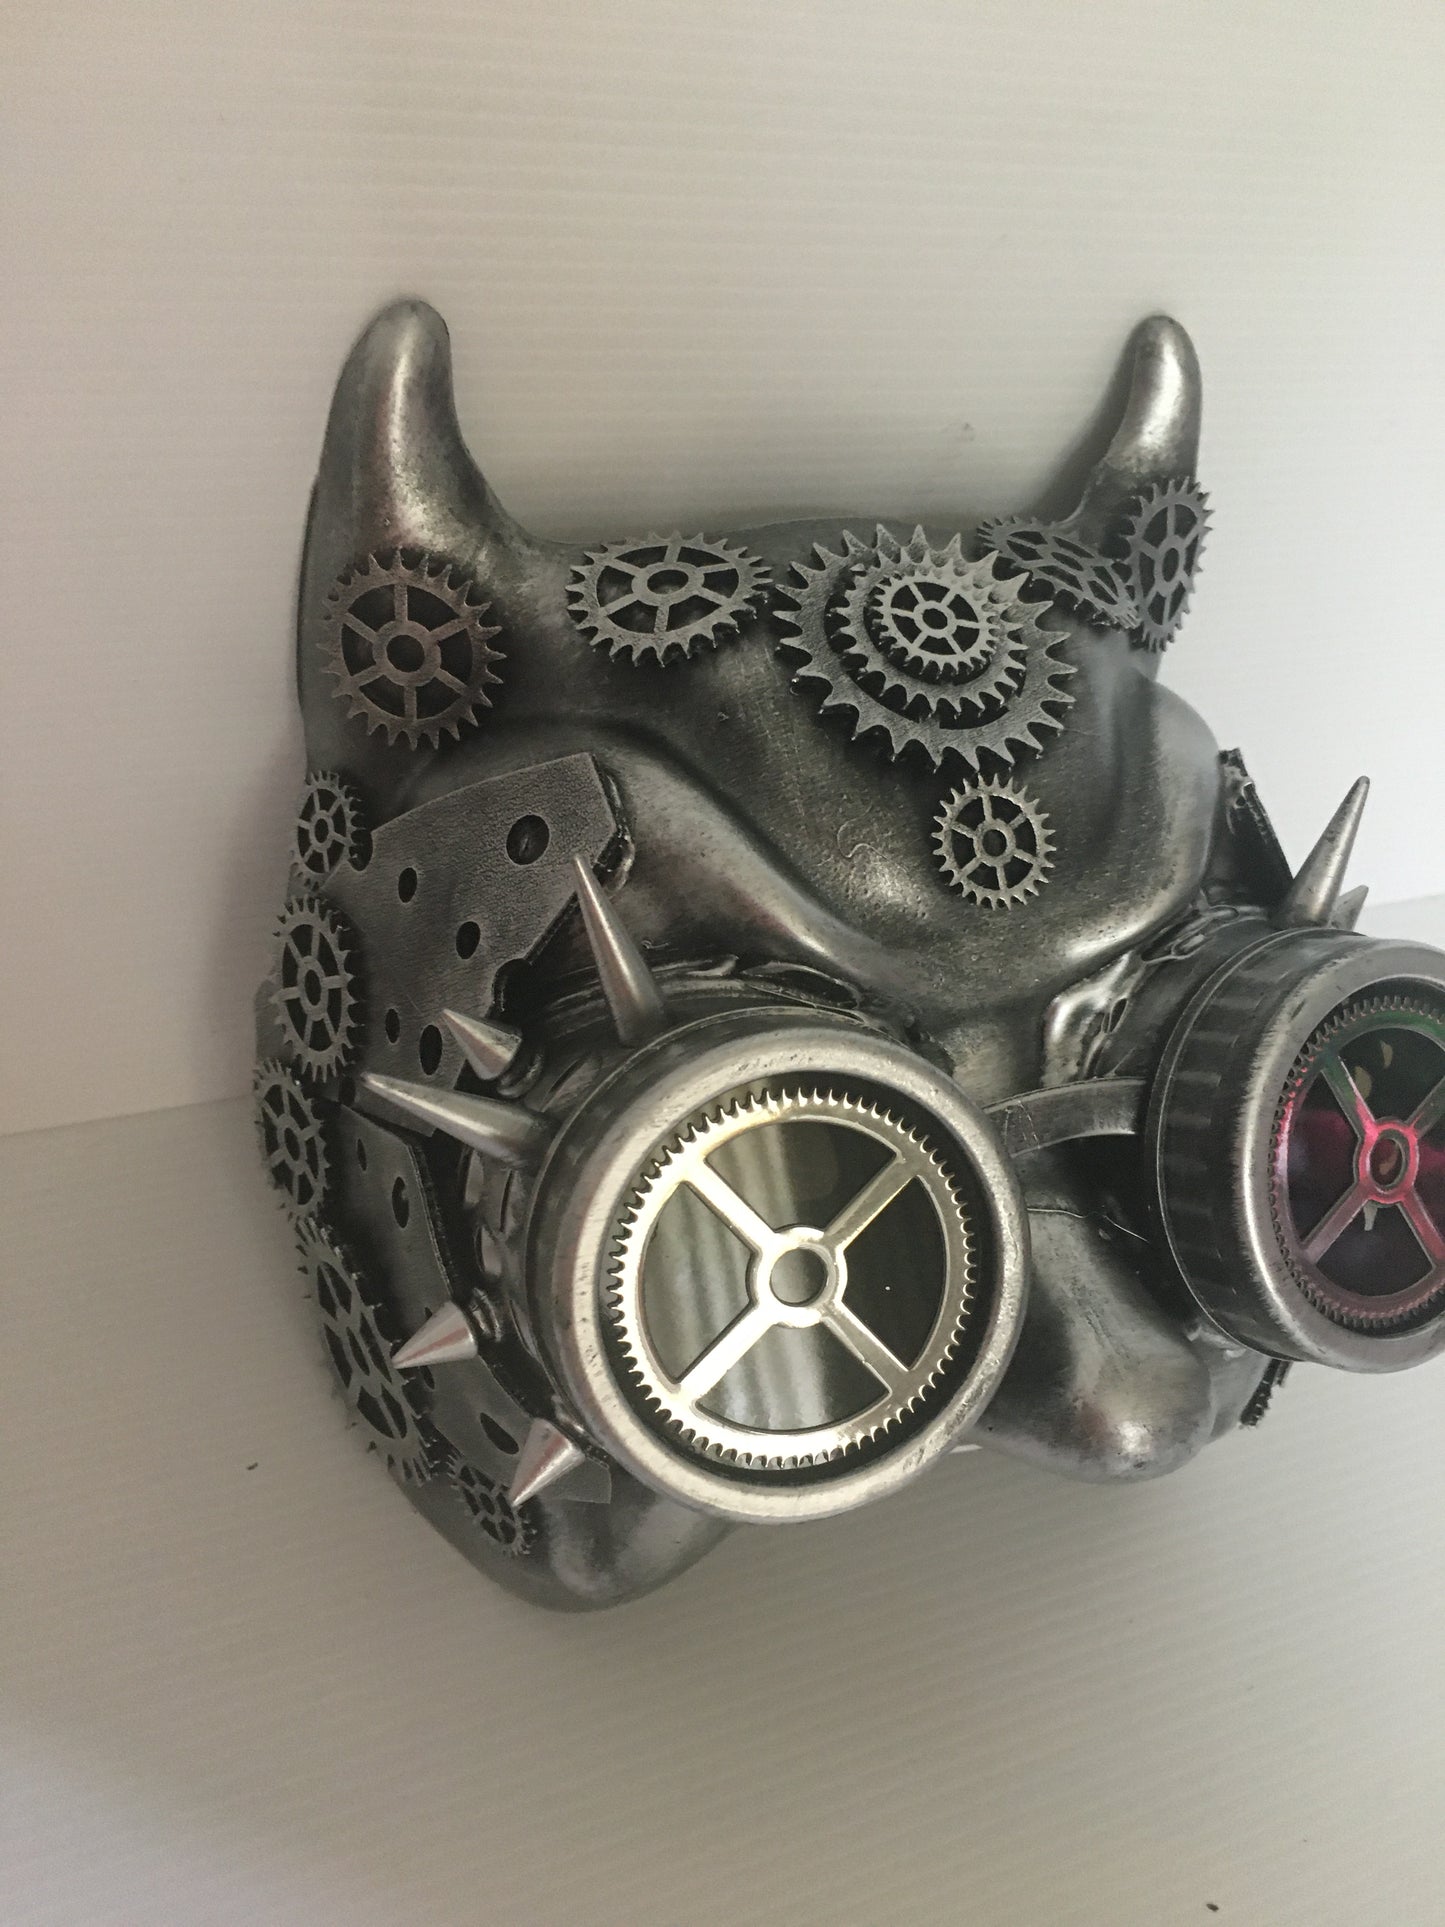 Steampunk /party face mask